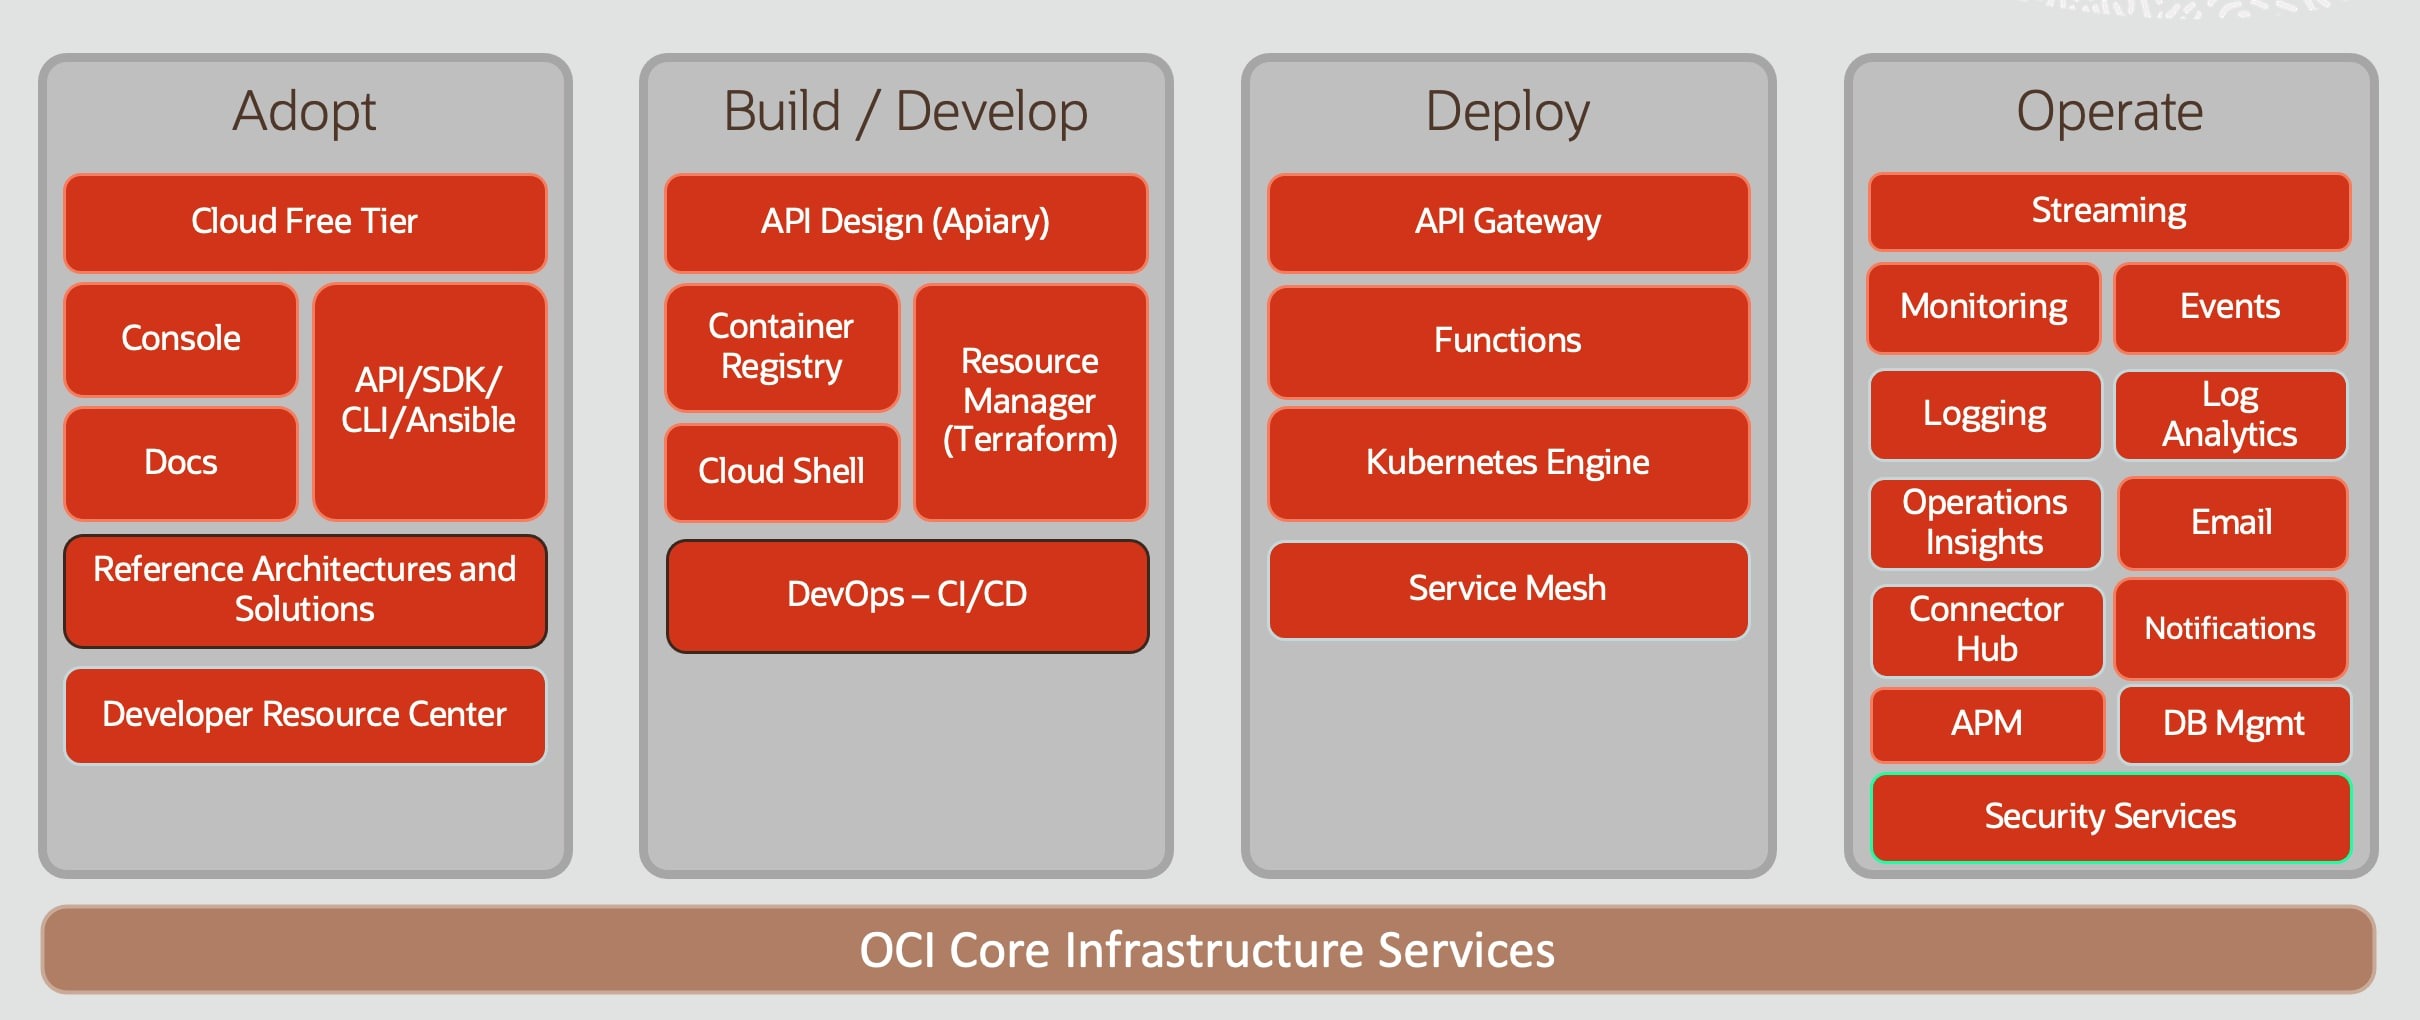 OCI core infrastructure services